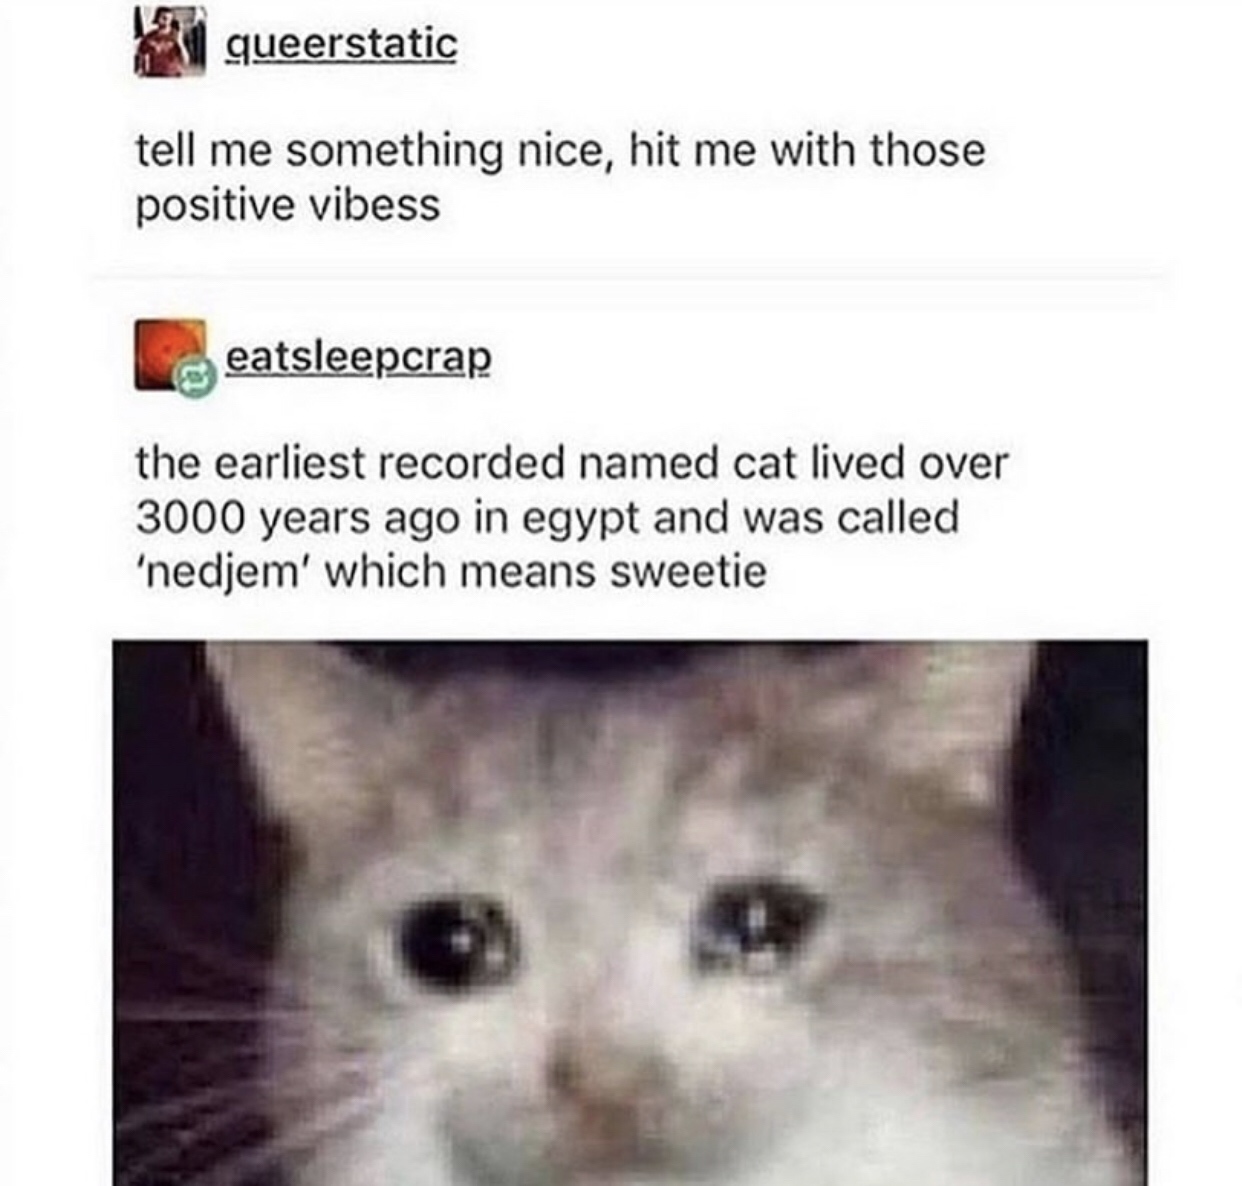 egyptian cat named sweetie - queerstatic tell me something nice, hit me with those positive vibess eatsleepcrap the earliest recorded named cat lived over 3000 years ago in egypt and was called 'nedjem' which means sweetie